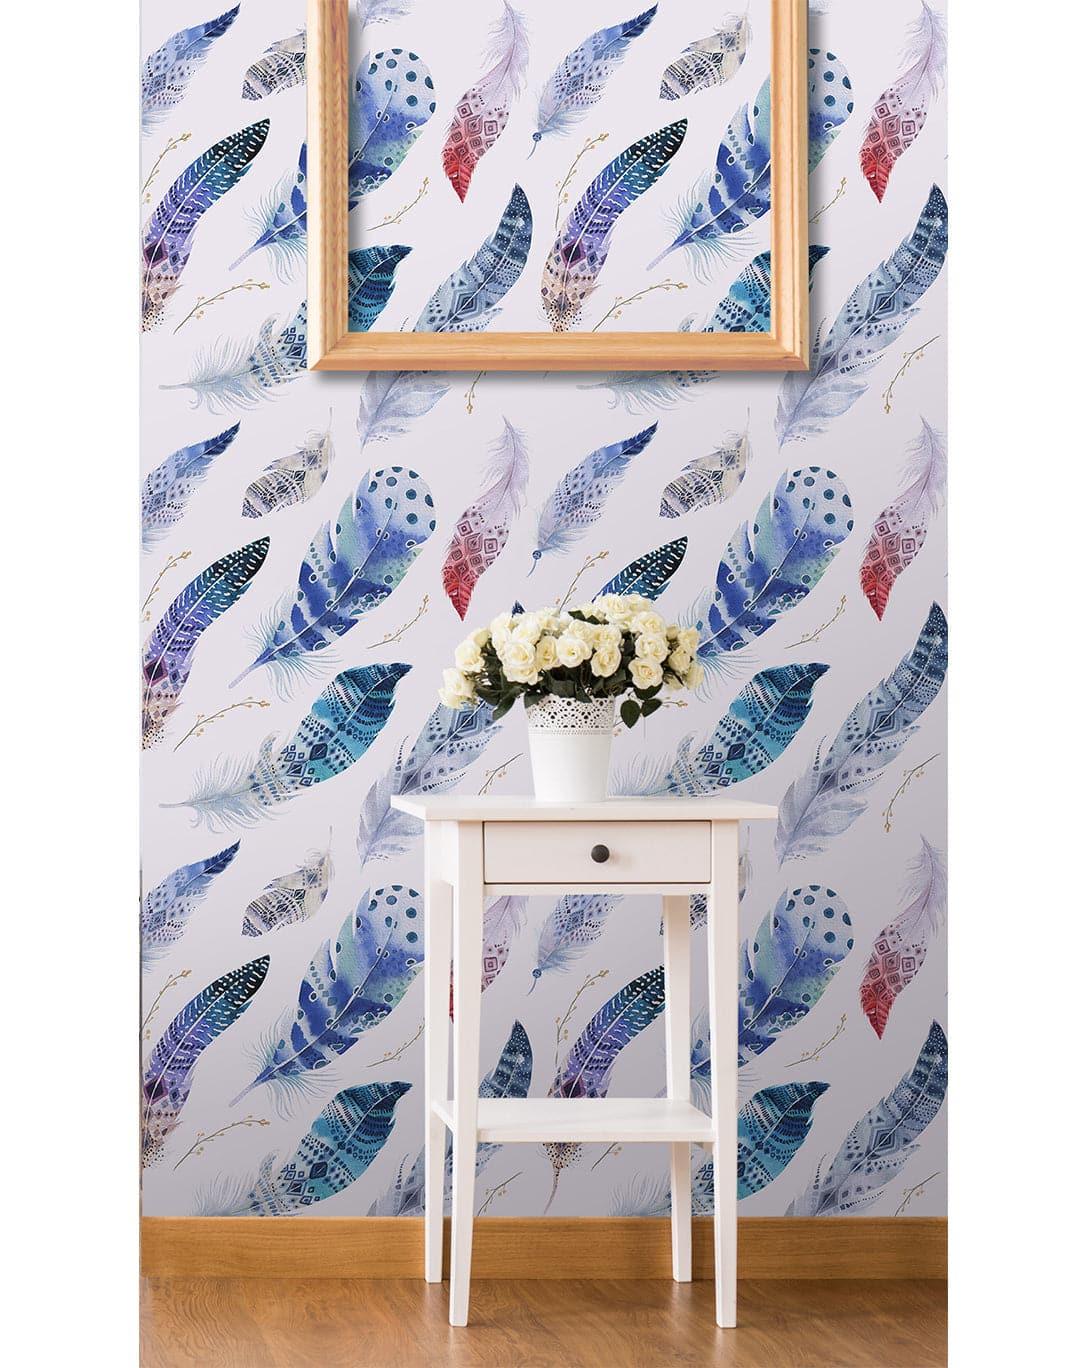 Watercolor Indian Feathers Removable Wallpaper 